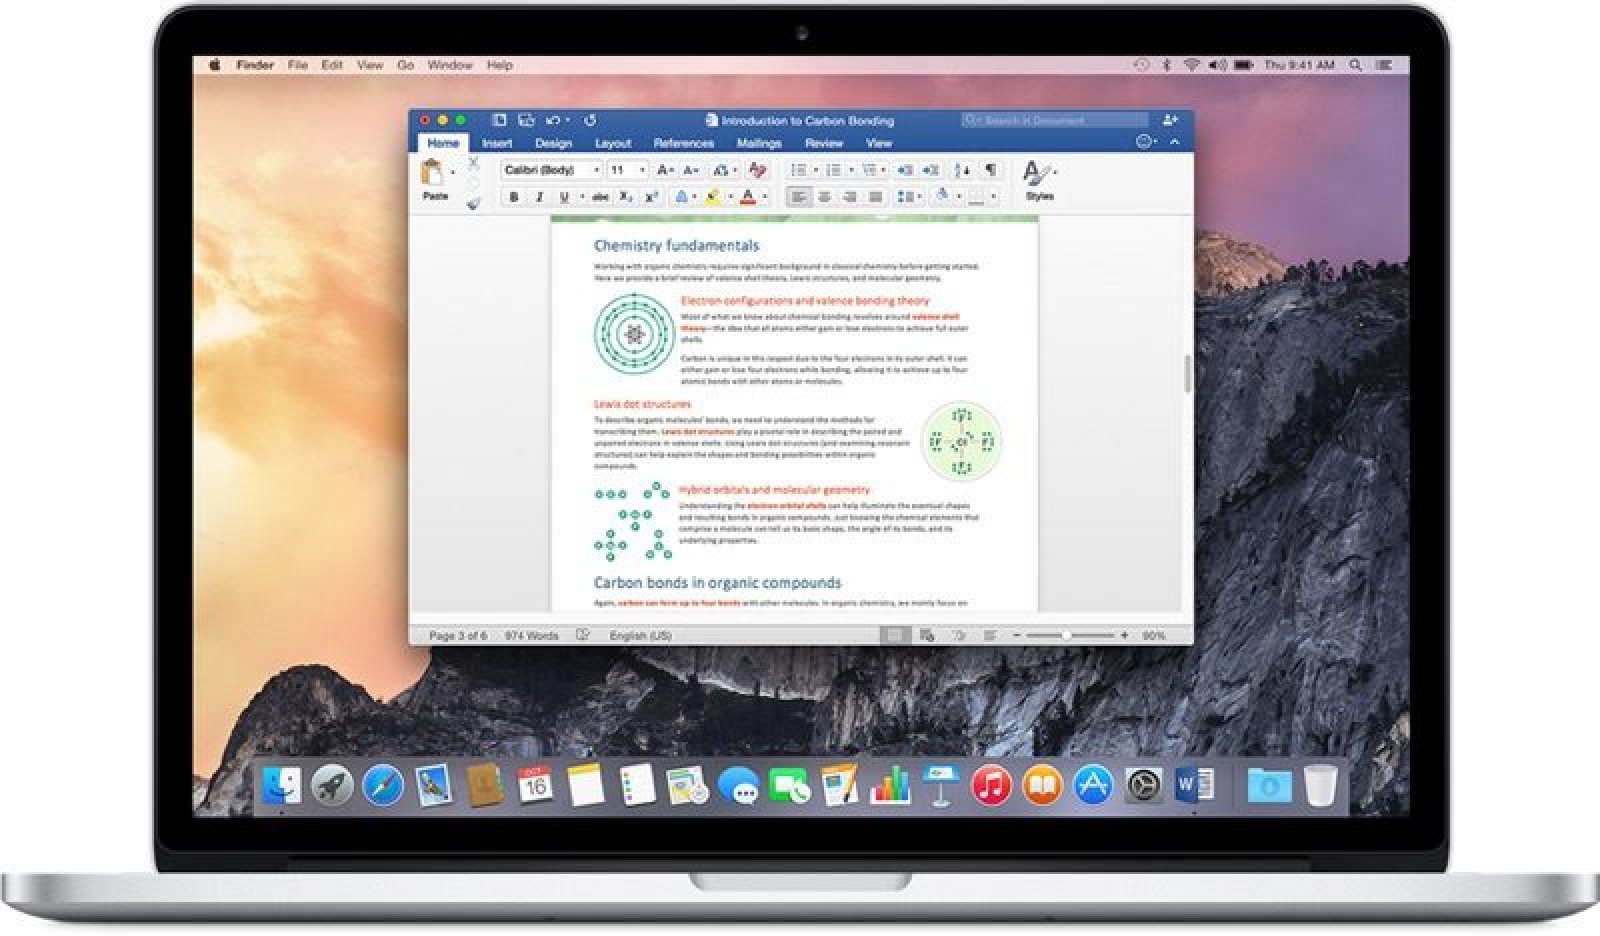 Microsoft excel update for mac